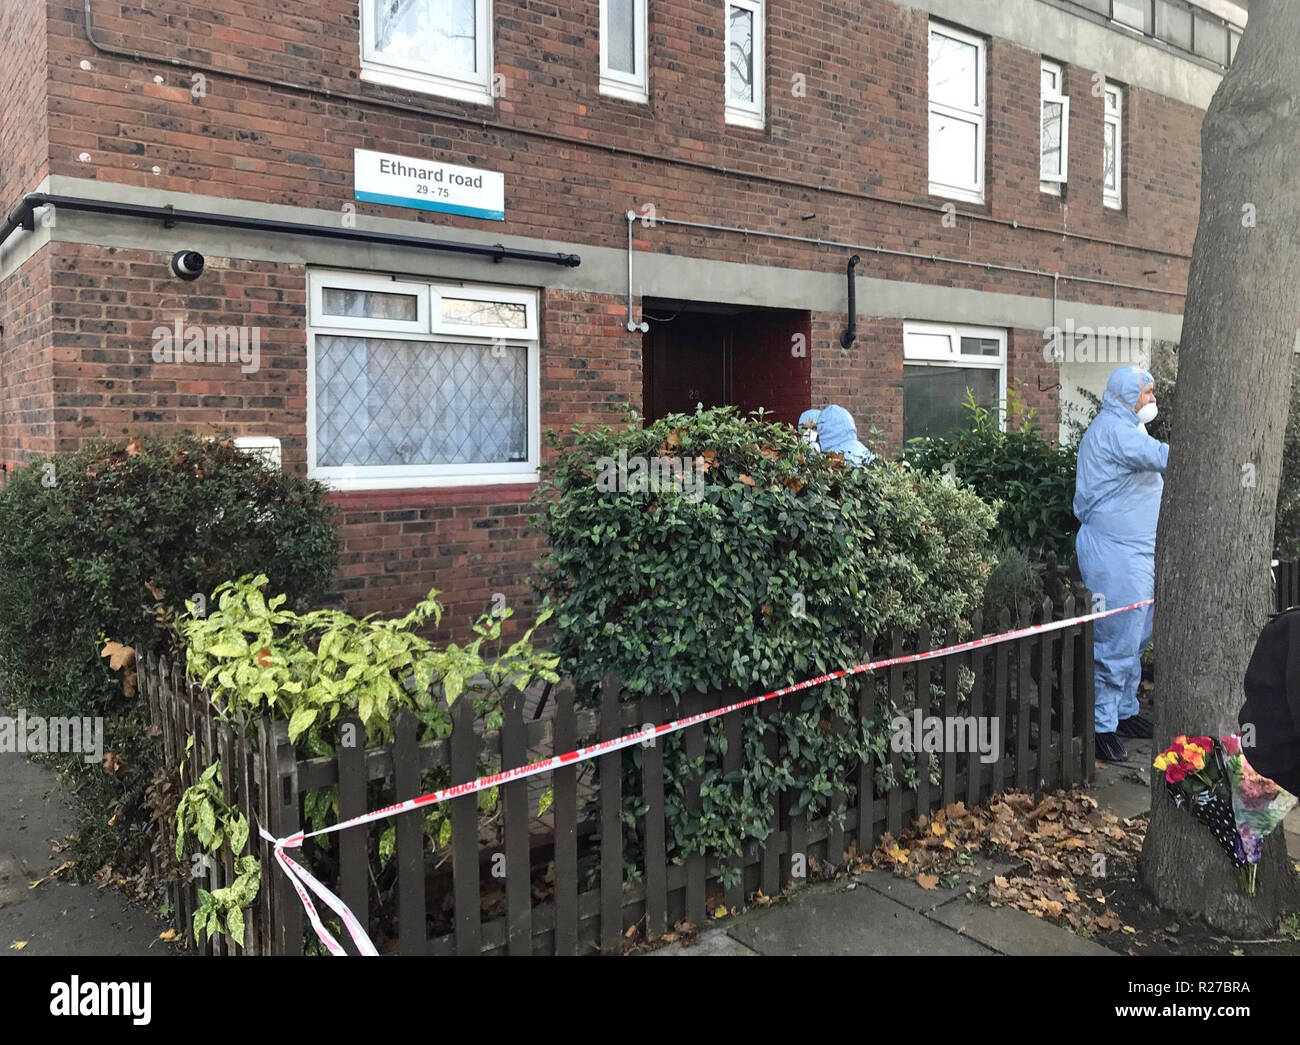 The scene at Ethnard Road, Peckham, where a 75-year-old woman was stabbed to death in a suspected domestic incident, as London's deadly year of violence continues. Stock Photo